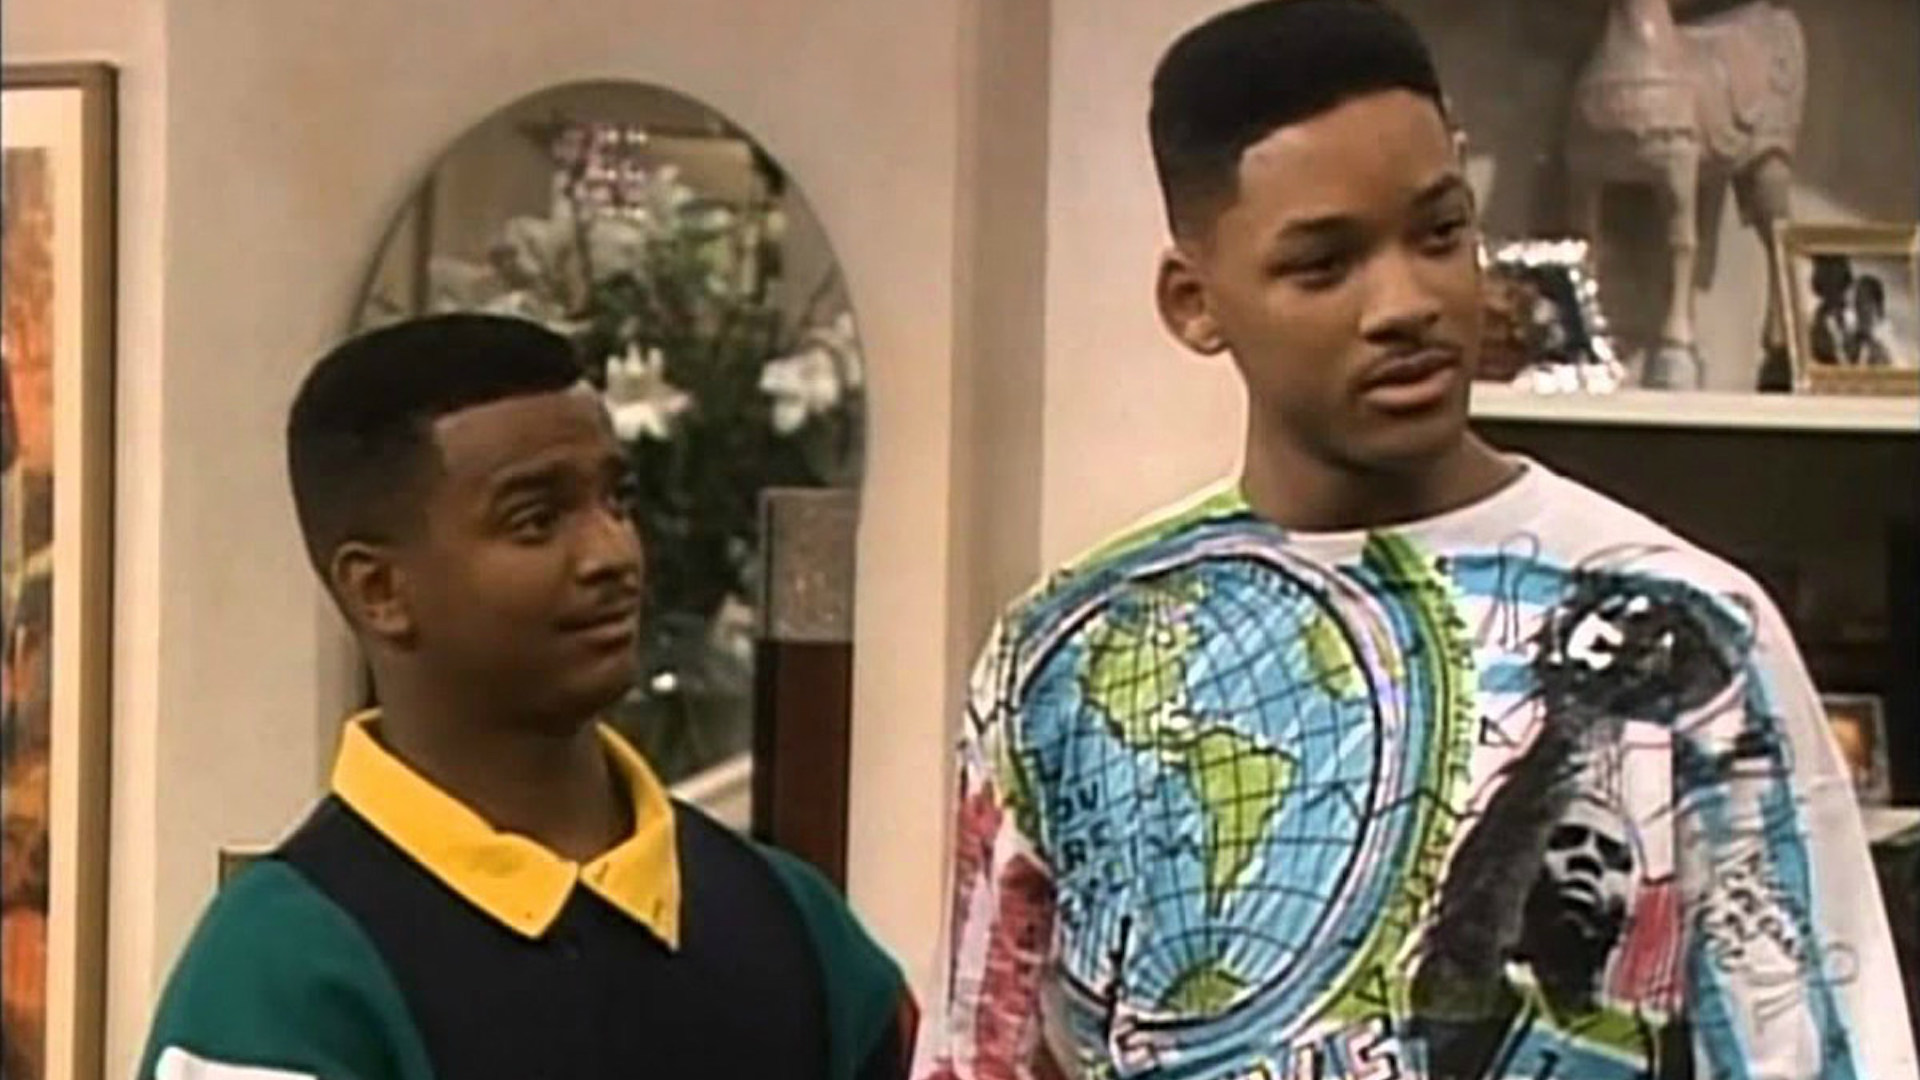 A scene from The Fresh Prince of Bel-Air